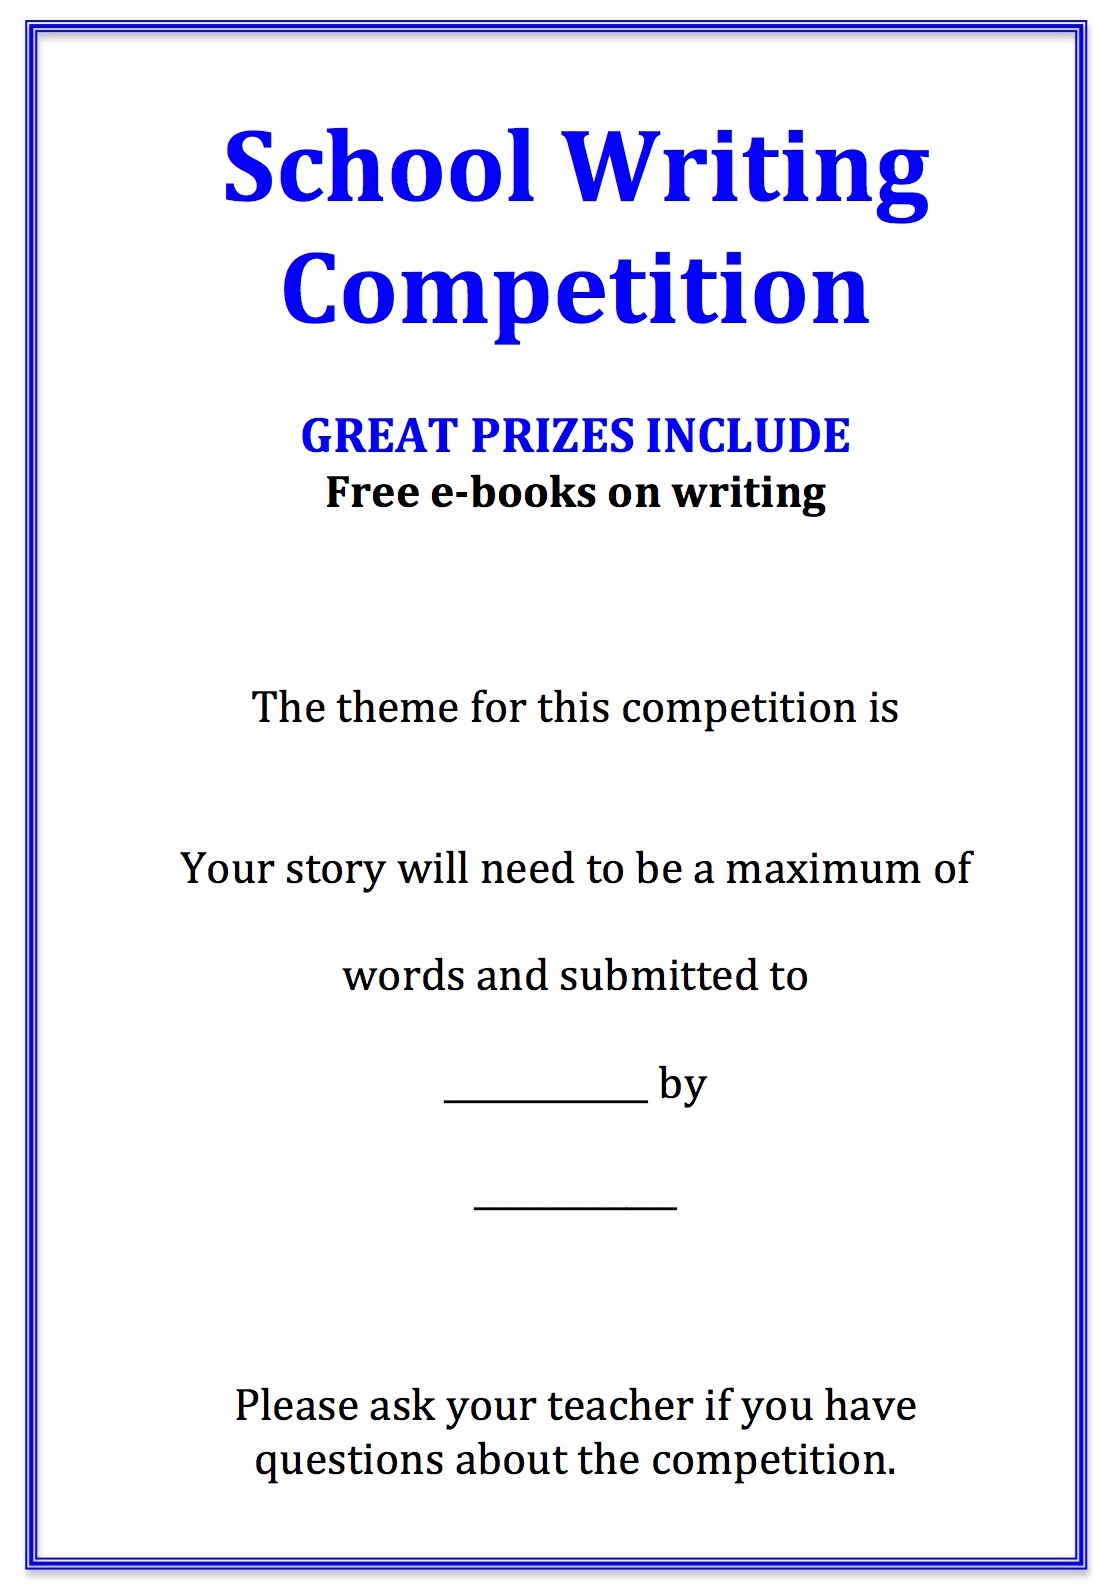 Run A Writing Competition For Kids at Your School and I’ll Donate